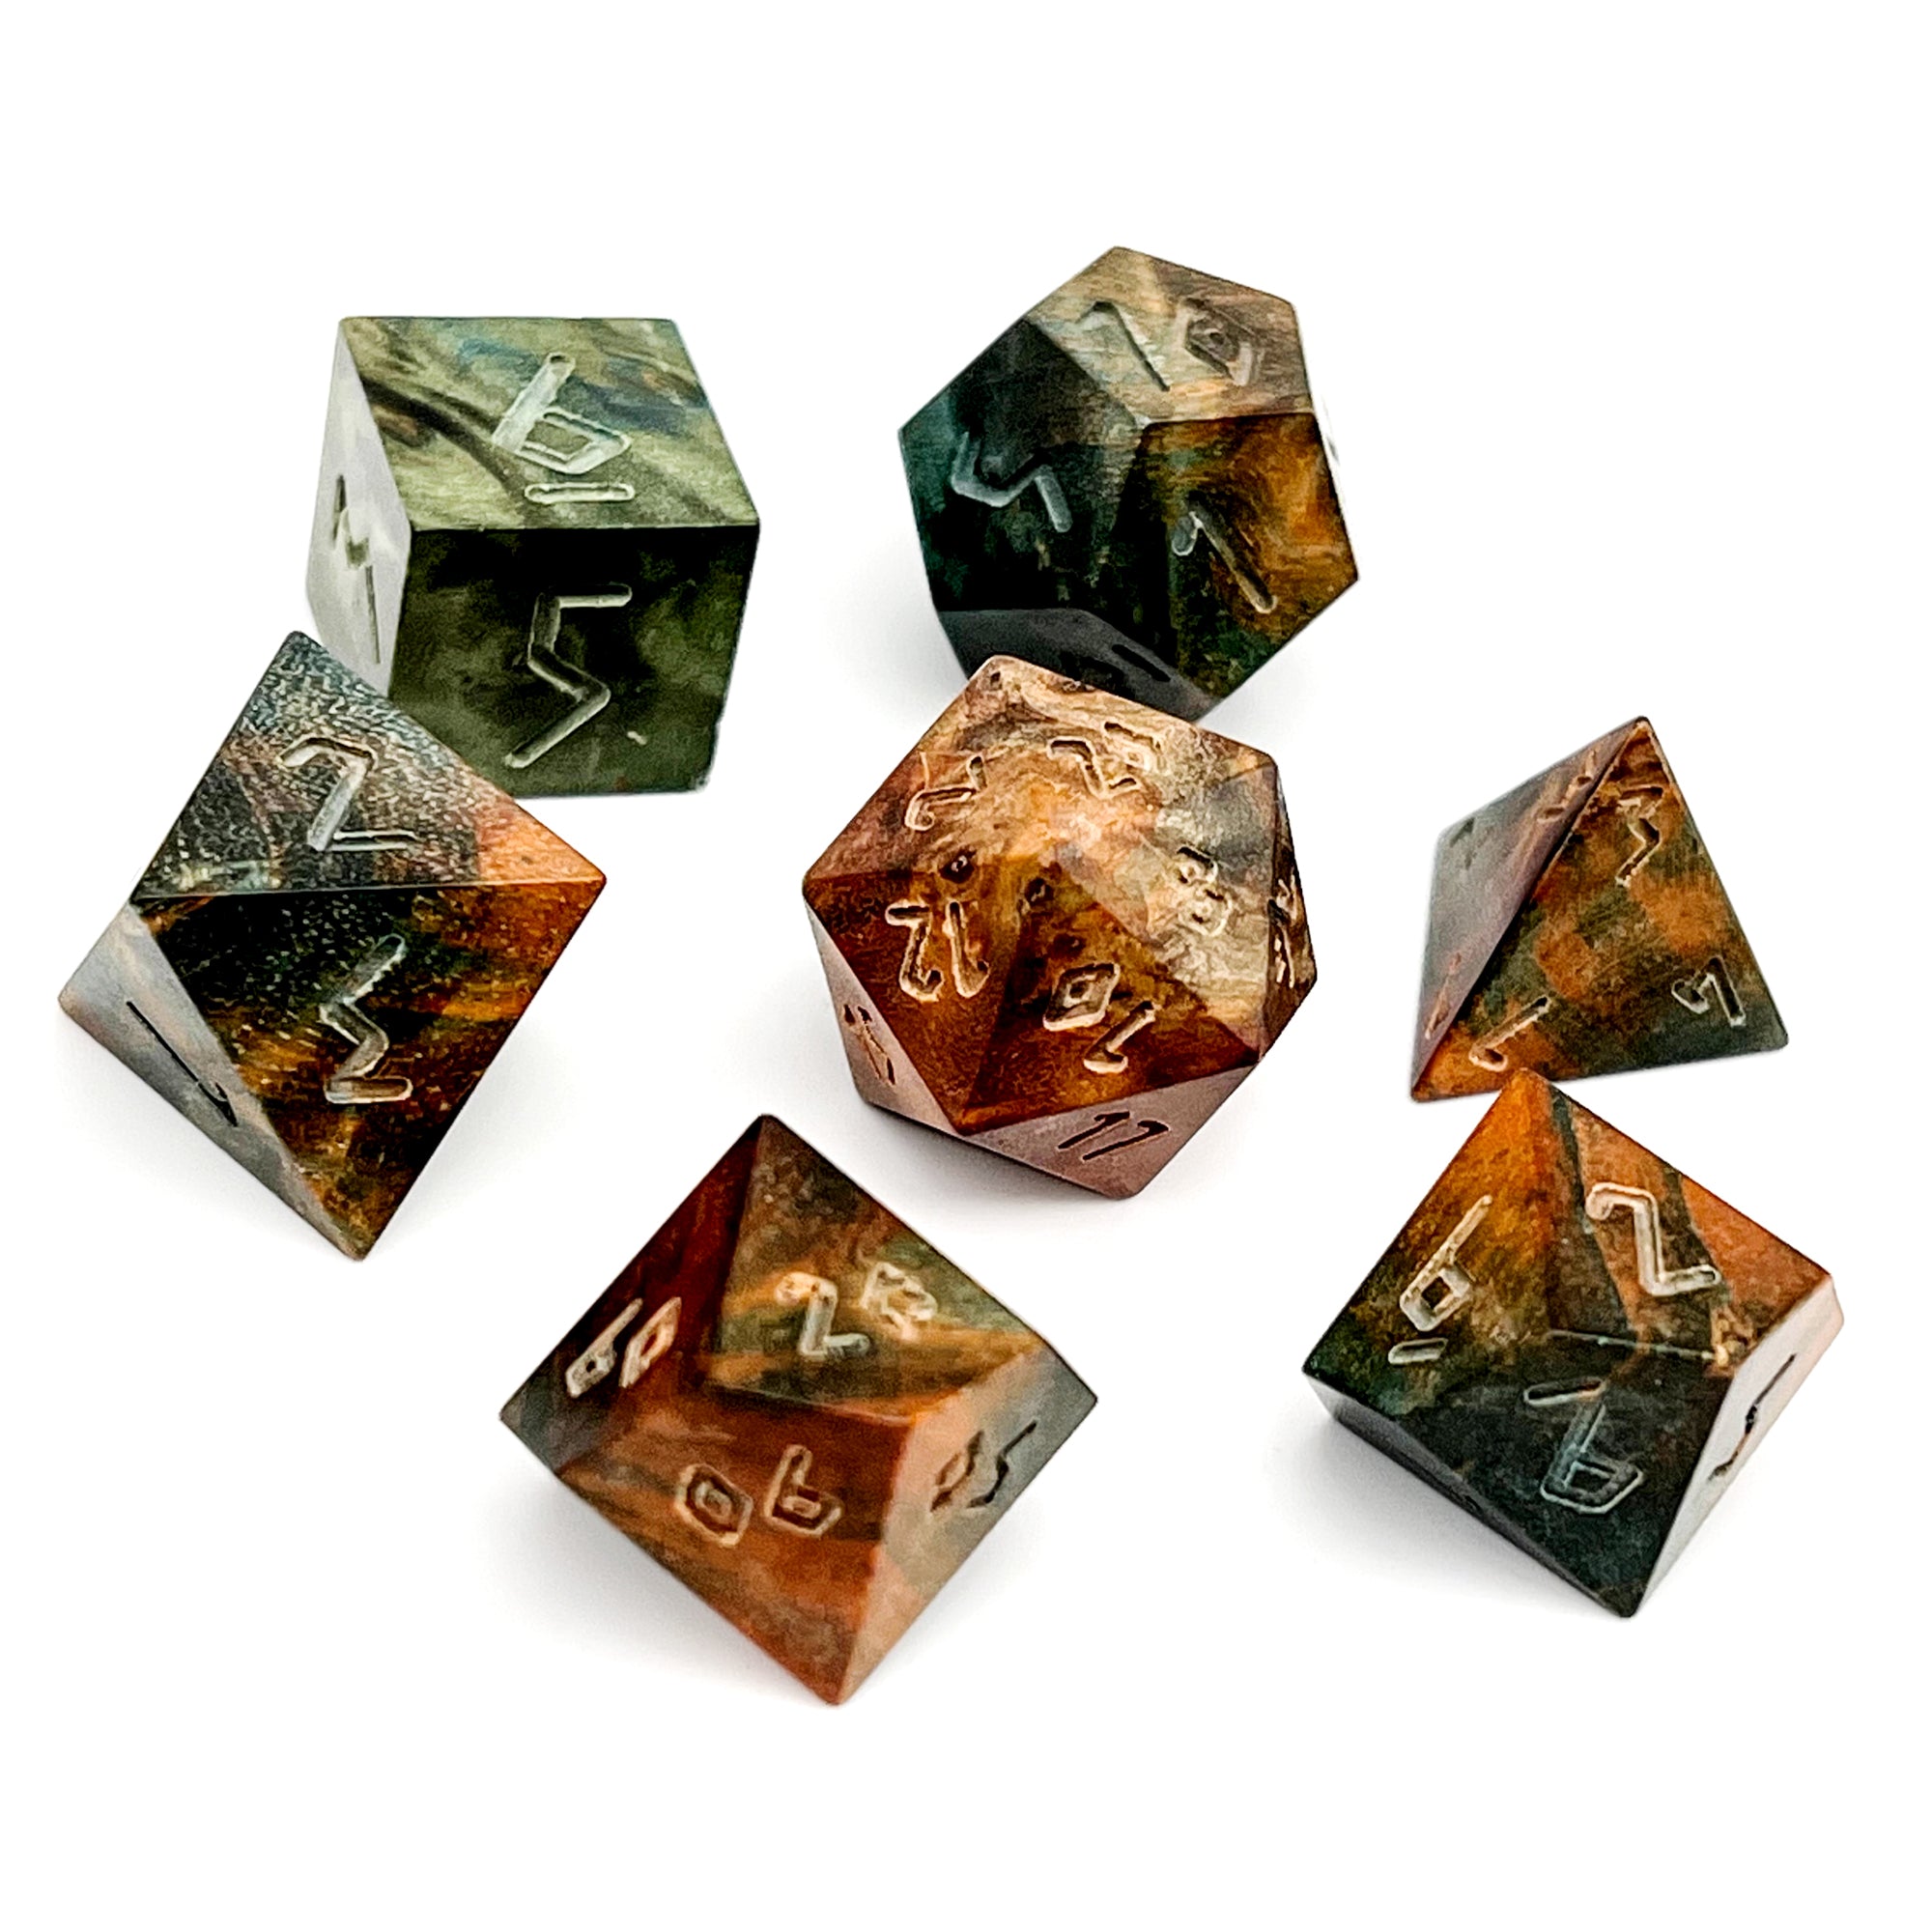 Orange and Green Striped Wood - 7 Piece RPG Wooden Dice Set